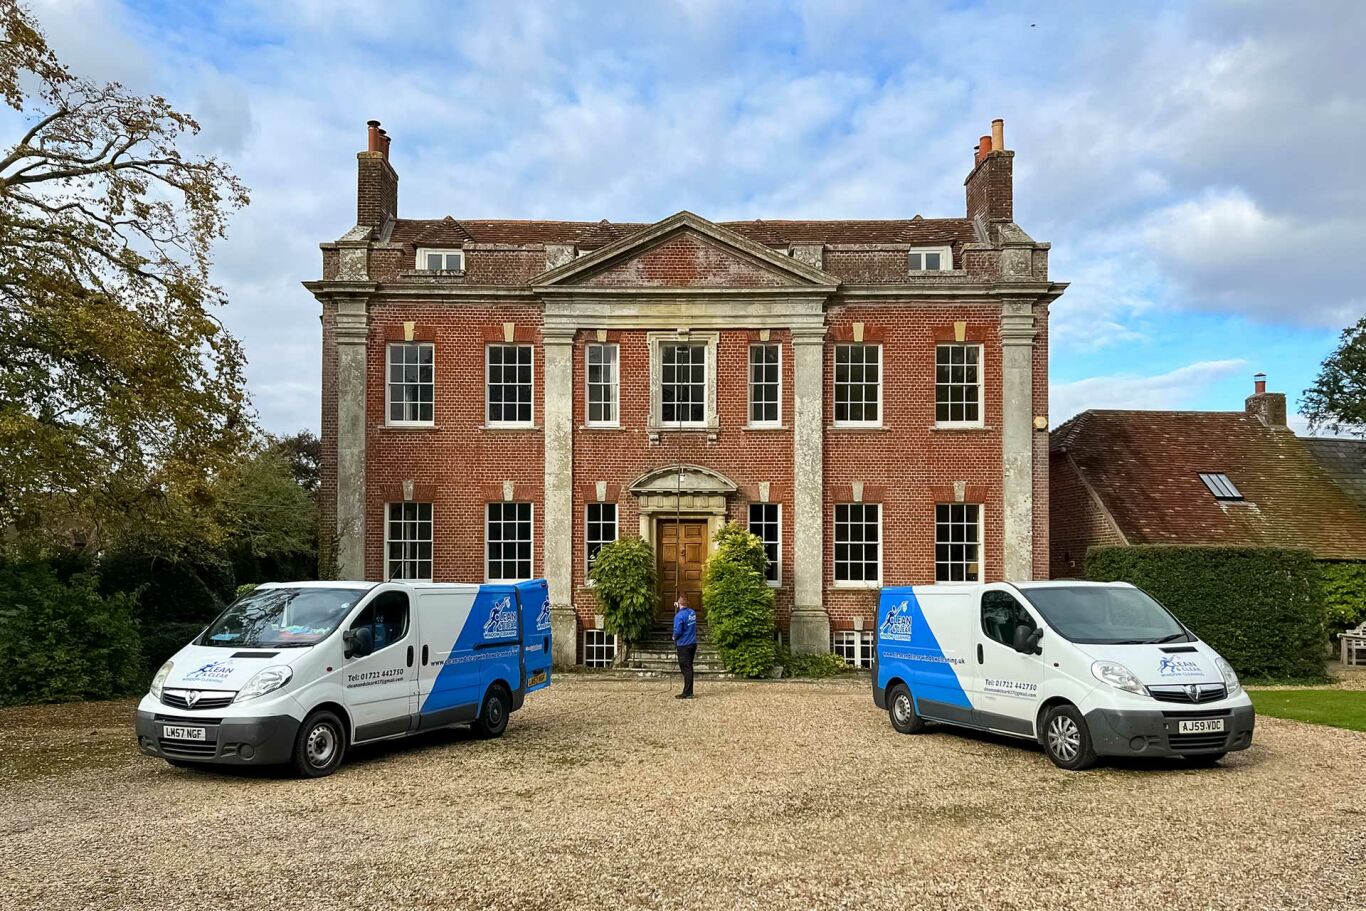 Man window cleaning a large stately home with two vans outside.